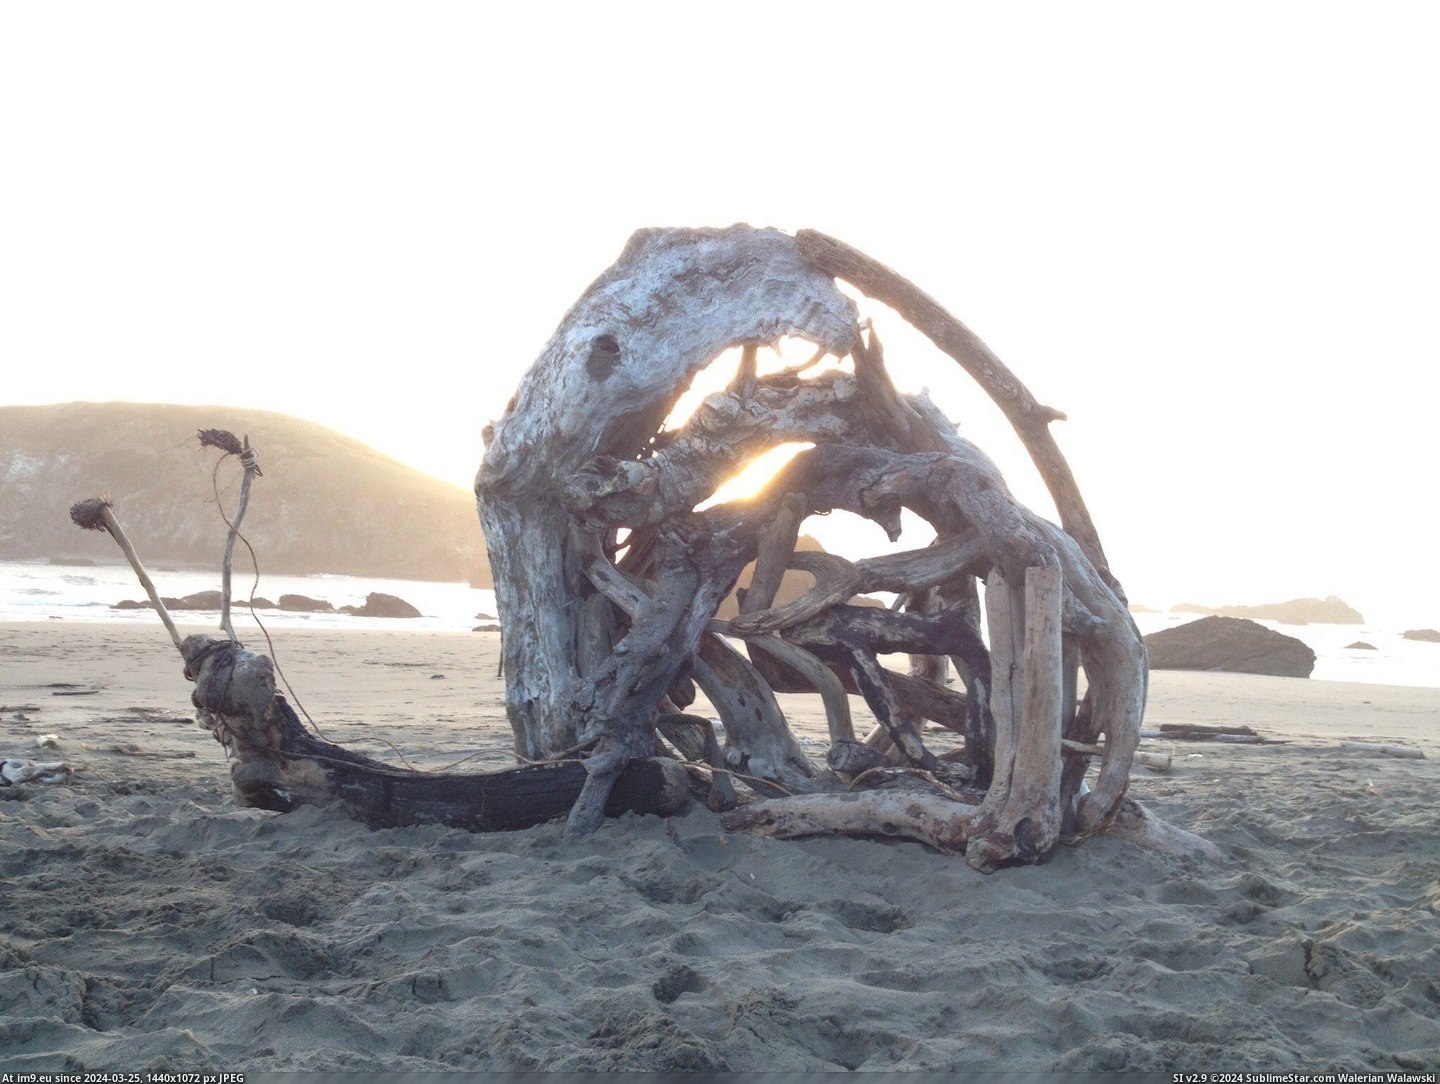 #Brother #Oregon #Driftwood #Shore #Snail [Pics] My brother made this snail in Oregon with driftwood and whatever he found on shore. Pic. (Изображение из альбом My r/PICS favs))